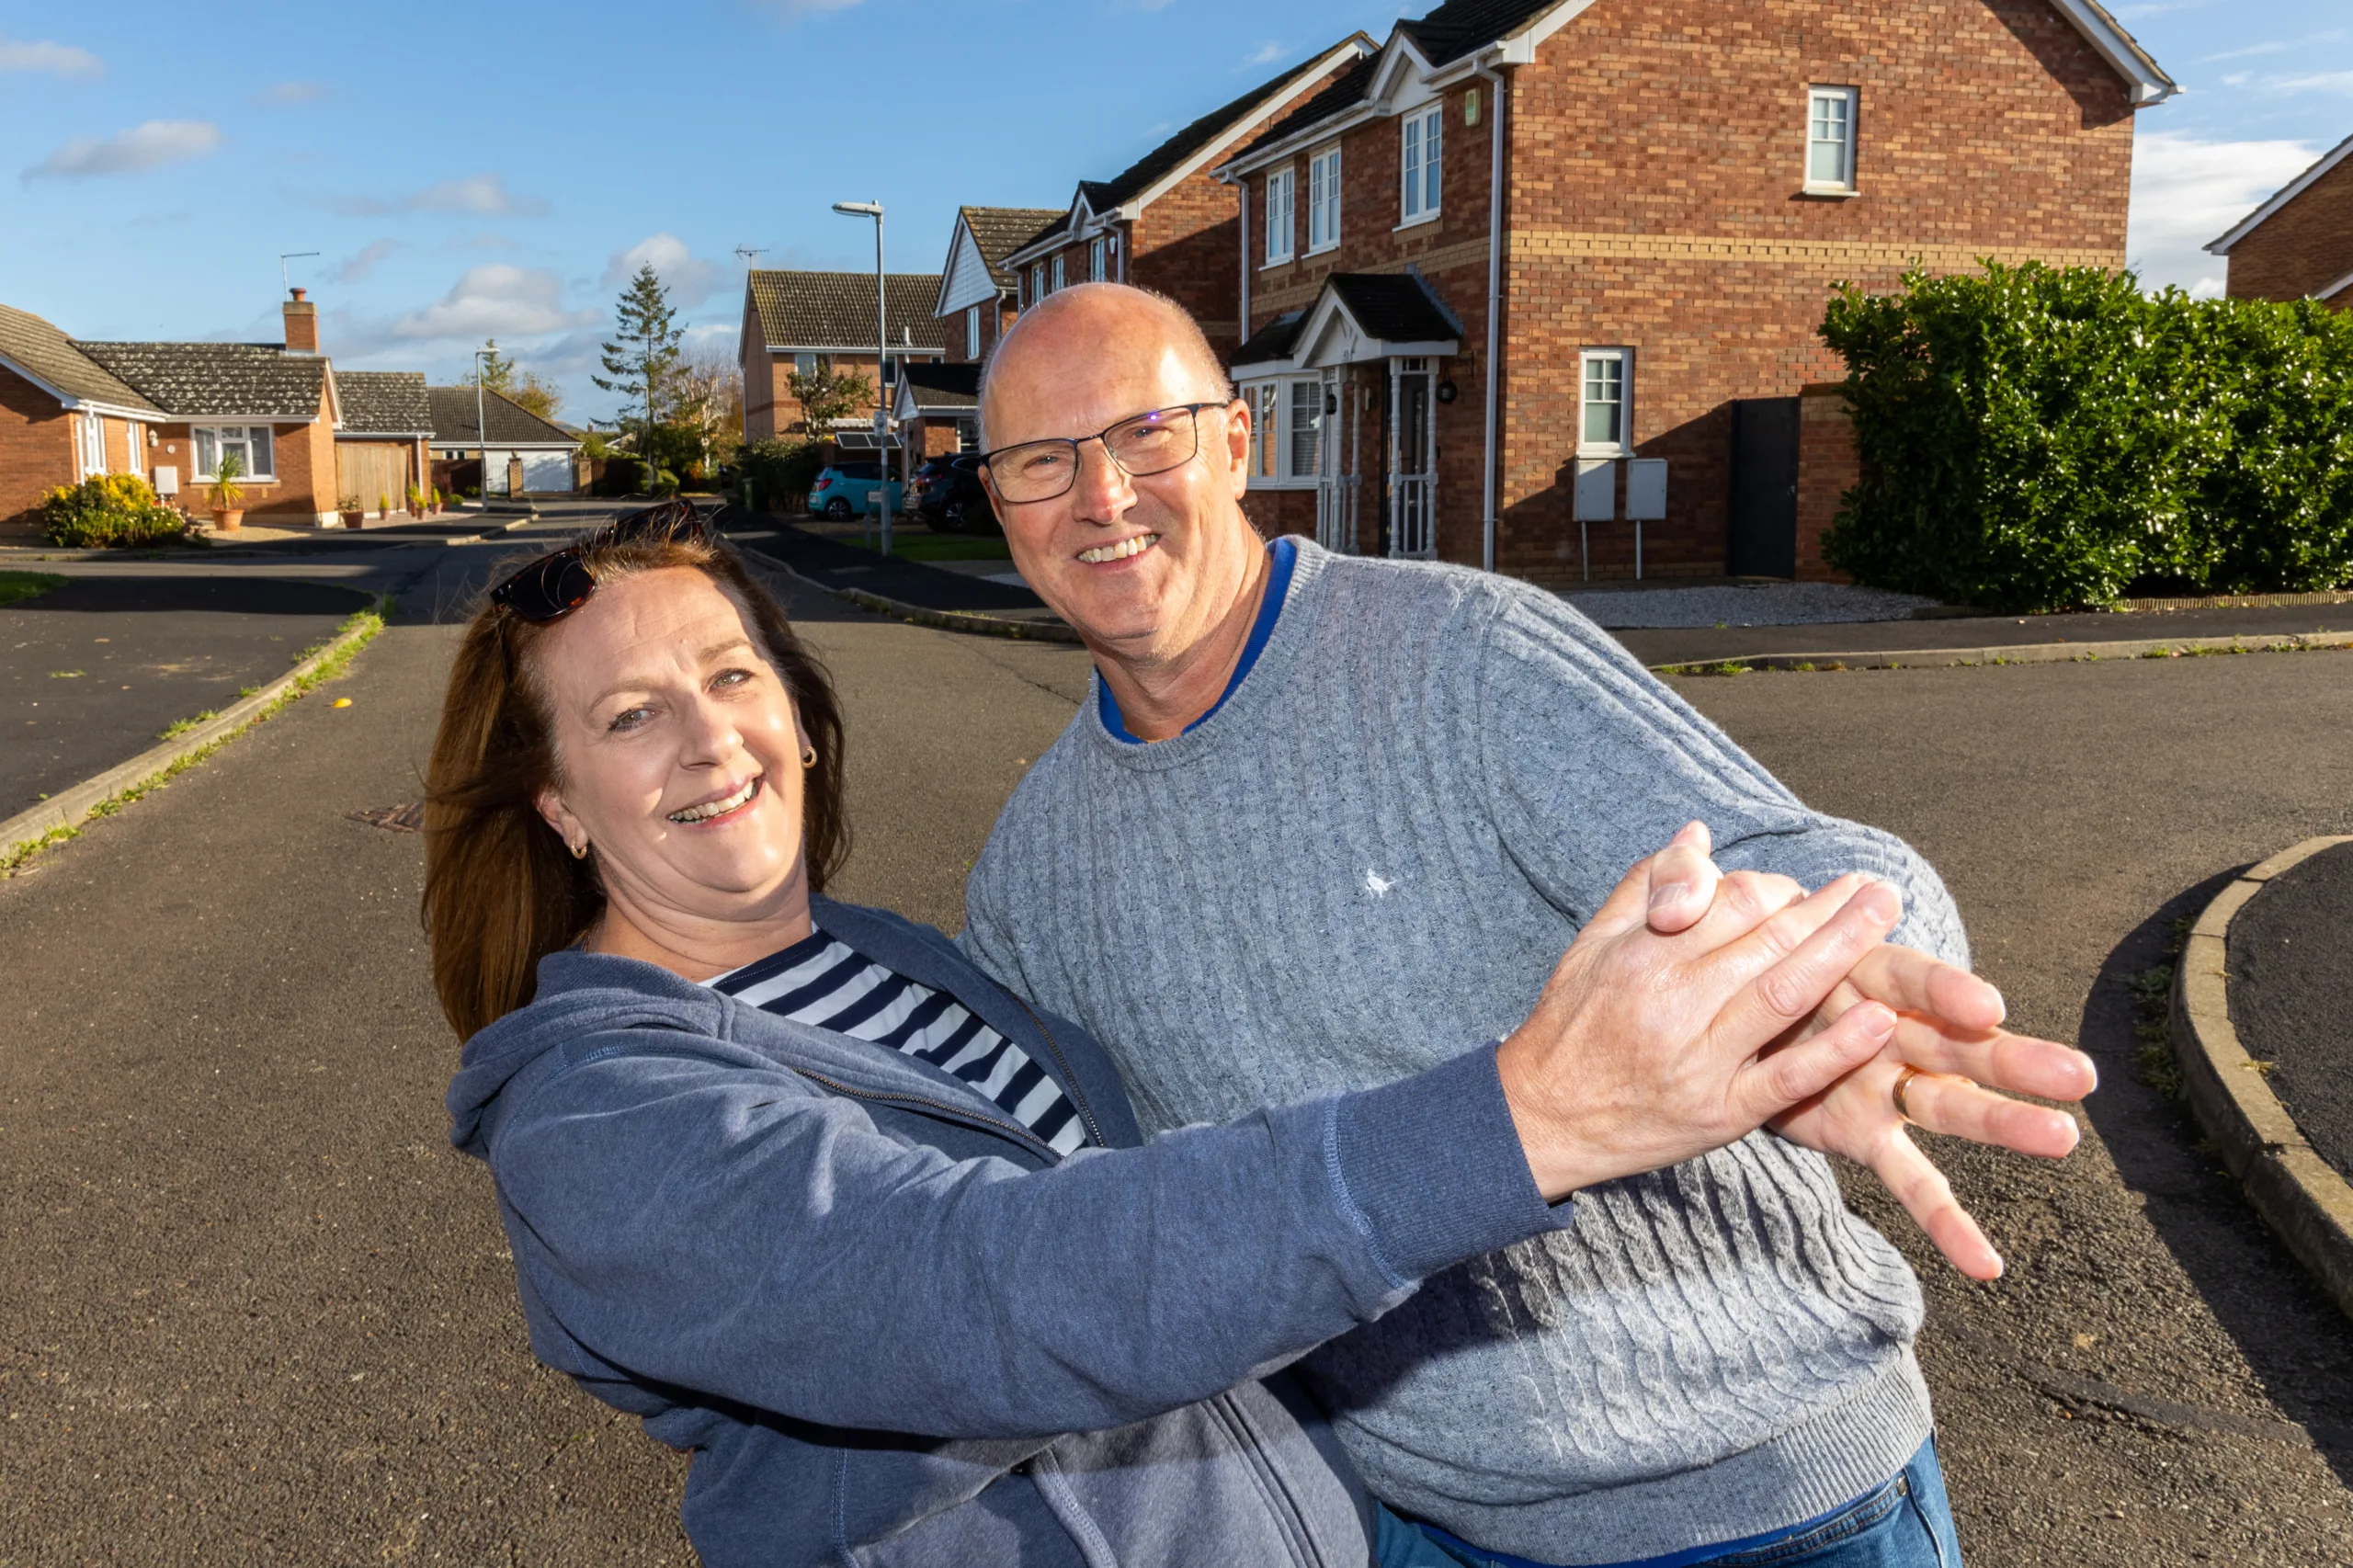 Anita and Vince Winter banked £235K thanks to their postcode